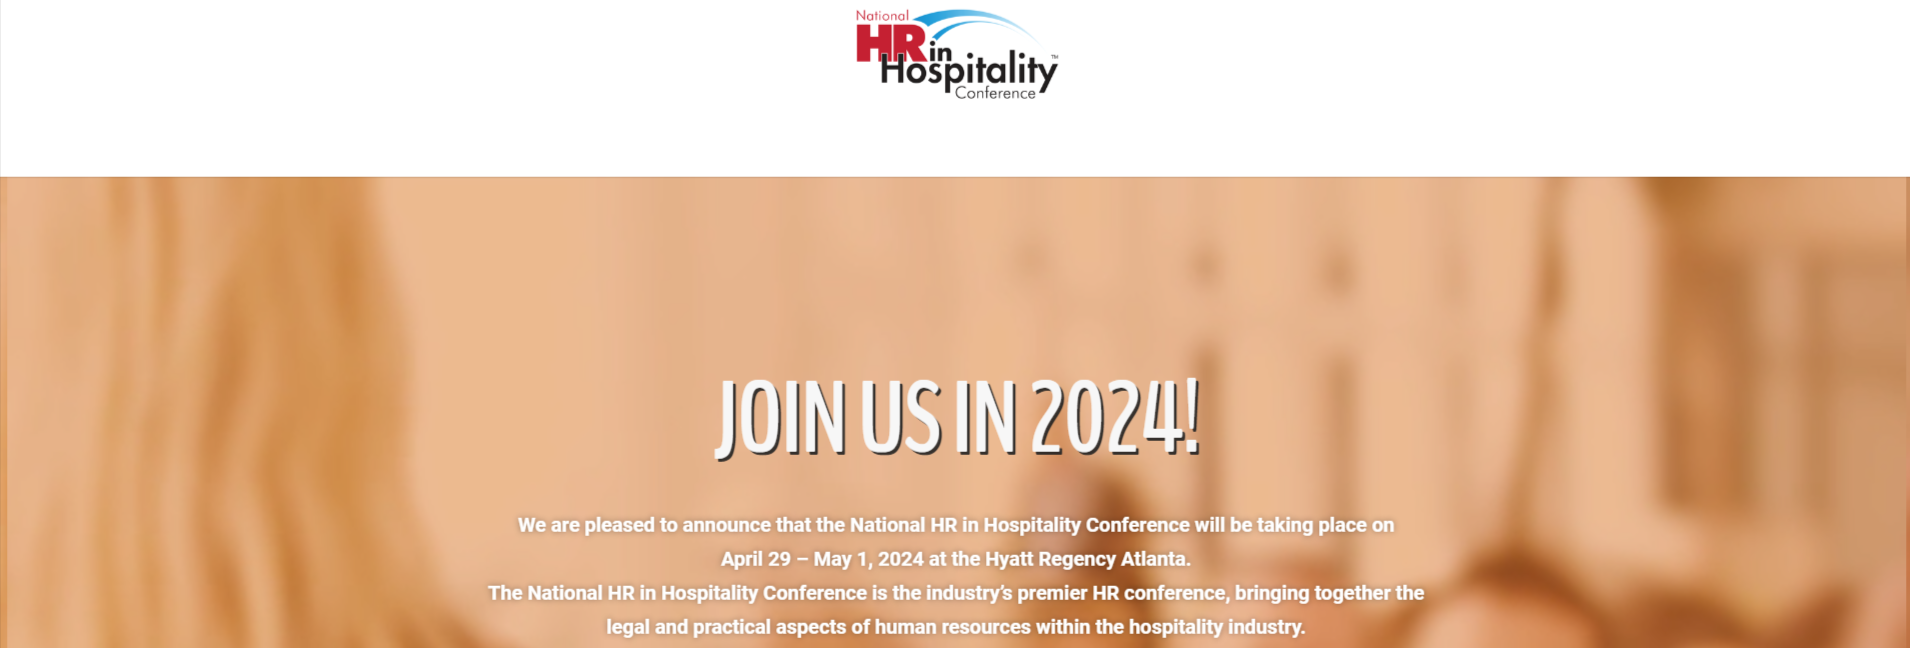 National-HR-in-Hospitality-Conference-April-29-May-1-2024.png